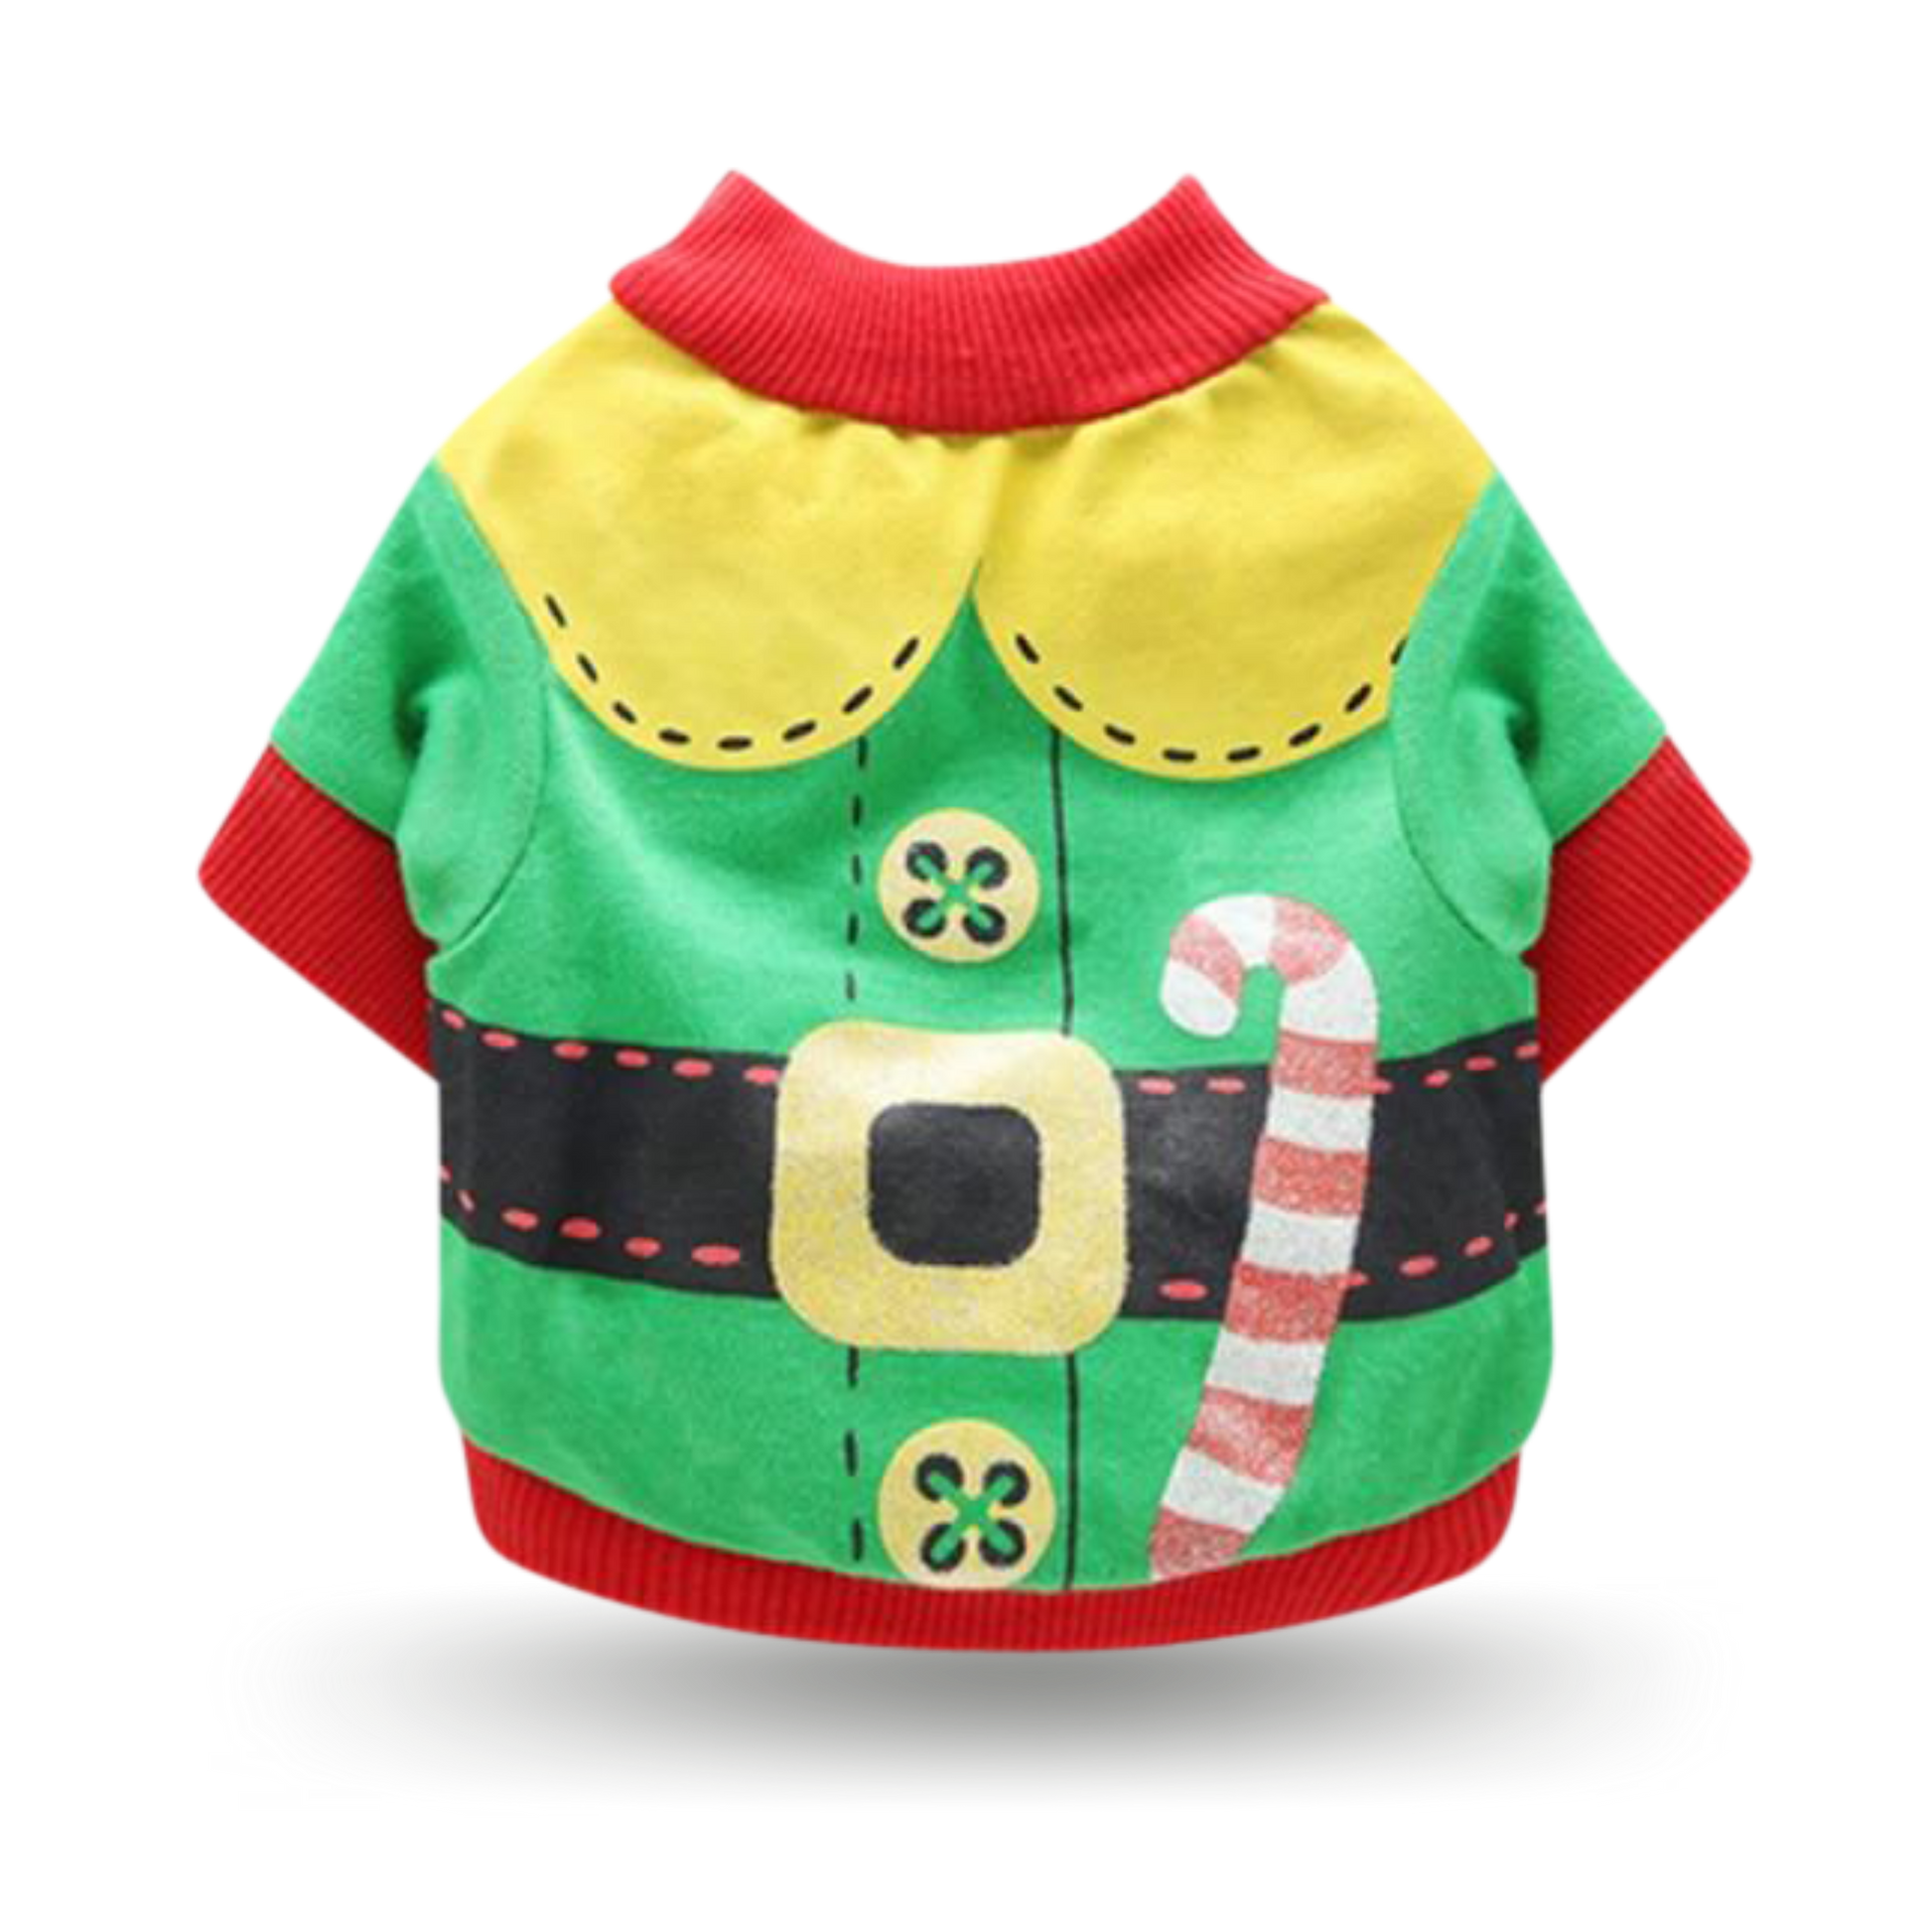 Soft cotton t-shirt with ribbing collar, arm and waist bands with green elf uniform and candy cane screen printed motif